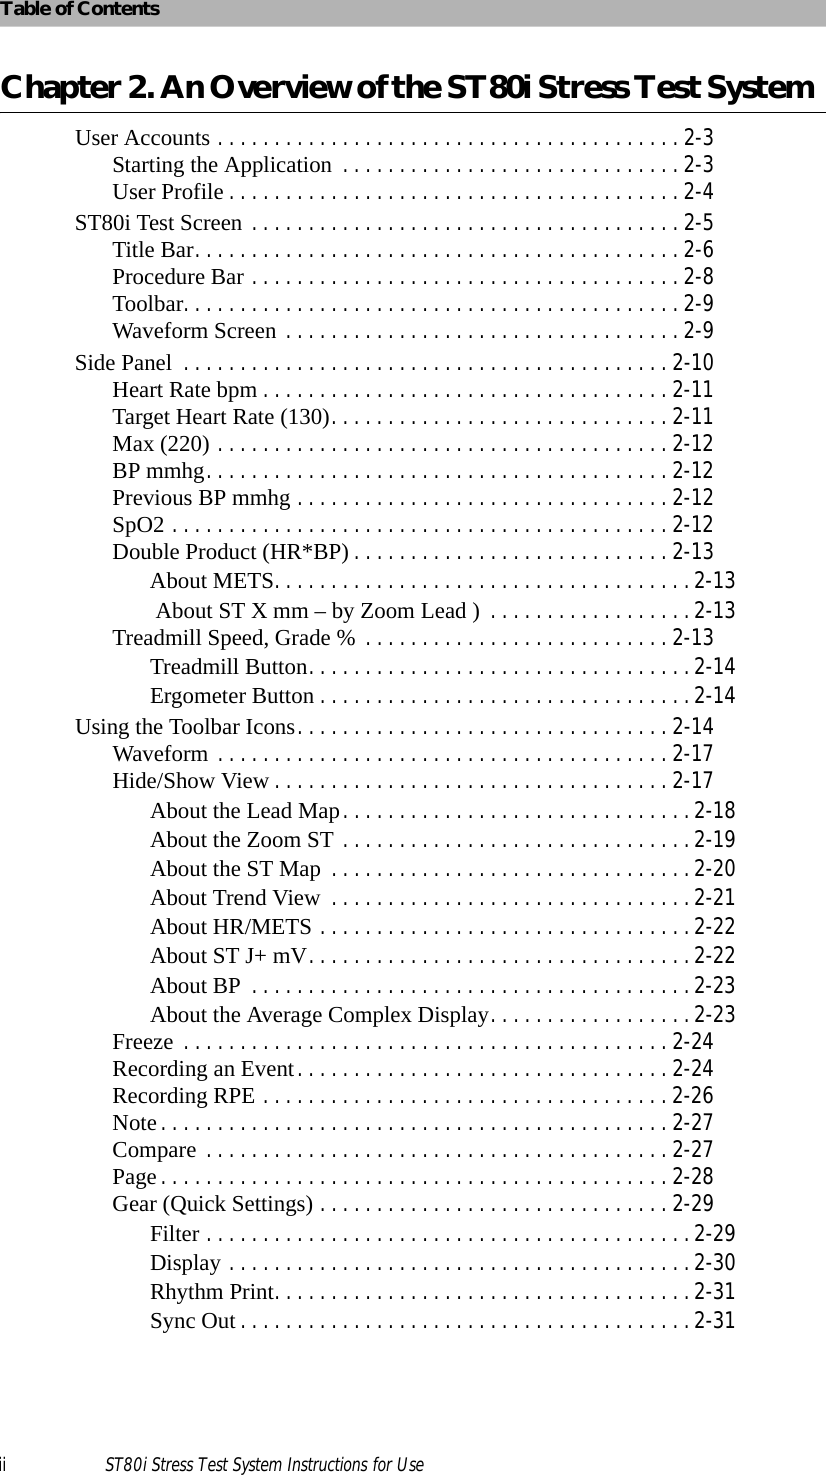 Table of Contentsii ST80i Stress Test System Instructions for UseChapter 2. An Overview of the ST80i Stress Test System User Accounts . . . . . . . . . . . . . . . . . . . . . . . . . . . . . . . . . . . . . . . . . 2-3Starting the Application . . . . . . . . . . . . . . . . . . . . . . . . . . . . . . 2-3User Profile . . . . . . . . . . . . . . . . . . . . . . . . . . . . . . . . . . . . . . . . 2-4ST80i Test Screen . . . . . . . . . . . . . . . . . . . . . . . . . . . . . . . . . . . . . . 2-5Title Bar. . . . . . . . . . . . . . . . . . . . . . . . . . . . . . . . . . . . . . . . . . . 2-6Procedure Bar . . . . . . . . . . . . . . . . . . . . . . . . . . . . . . . . . . . . . . 2-8Toolbar. . . . . . . . . . . . . . . . . . . . . . . . . . . . . . . . . . . . . . . . . . . . 2-9Waveform Screen . . . . . . . . . . . . . . . . . . . . . . . . . . . . . . . . . . . 2-9Side Panel  . . . . . . . . . . . . . . . . . . . . . . . . . . . . . . . . . . . . . . . . . . . 2-10Heart Rate bpm . . . . . . . . . . . . . . . . . . . . . . . . . . . . . . . . . . . . 2-11Target Heart Rate (130). . . . . . . . . . . . . . . . . . . . . . . . . . . . . . 2-11Max (220) . . . . . . . . . . . . . . . . . . . . . . . . . . . . . . . . . . . . . . . . 2-12BP mmhg. . . . . . . . . . . . . . . . . . . . . . . . . . . . . . . . . . . . . . . . . 2-12Previous BP mmhg . . . . . . . . . . . . . . . . . . . . . . . . . . . . . . . . . 2-12SpO2 . . . . . . . . . . . . . . . . . . . . . . . . . . . . . . . . . . . . . . . . . . . . 2-12Double Product (HR*BP) . . . . . . . . . . . . . . . . . . . . . . . . . . . . 2-13About METS. . . . . . . . . . . . . . . . . . . . . . . . . . . . . . . . . . . . . 2-13 About ST X mm – by Zoom Lead )  . . . . . . . . . . . . . . . . . . 2-13Treadmill Speed, Grade % . . . . . . . . . . . . . . . . . . . . . . . . . . . 2-13Treadmill Button. . . . . . . . . . . . . . . . . . . . . . . . . . . . . . . . . . 2-14Ergometer Button . . . . . . . . . . . . . . . . . . . . . . . . . . . . . . . . . 2-14Using the Toolbar Icons. . . . . . . . . . . . . . . . . . . . . . . . . . . . . . . . . 2-14Waveform . . . . . . . . . . . . . . . . . . . . . . . . . . . . . . . . . . . . . . . . 2-17Hide/Show View . . . . . . . . . . . . . . . . . . . . . . . . . . . . . . . . . . . 2-17About the Lead Map. . . . . . . . . . . . . . . . . . . . . . . . . . . . . . . 2-18About the Zoom ST . . . . . . . . . . . . . . . . . . . . . . . . . . . . . . . 2-19About the ST Map  . . . . . . . . . . . . . . . . . . . . . . . . . . . . . . . . 2-20About Trend View  . . . . . . . . . . . . . . . . . . . . . . . . . . . . . . . . 2-21About HR/METS . . . . . . . . . . . . . . . . . . . . . . . . . . . . . . . . . 2-22About ST J+ mV. . . . . . . . . . . . . . . . . . . . . . . . . . . . . . . . . . 2-22About BP  . . . . . . . . . . . . . . . . . . . . . . . . . . . . . . . . . . . . . . . 2-23About the Average Complex Display. . . . . . . . . . . . . . . . . . 2-23Freeze  . . . . . . . . . . . . . . . . . . . . . . . . . . . . . . . . . . . . . . . . . . . 2-24Recording an Event. . . . . . . . . . . . . . . . . . . . . . . . . . . . . . . . . 2-24Recording RPE . . . . . . . . . . . . . . . . . . . . . . . . . . . . . . . . . . . . 2-26Note . . . . . . . . . . . . . . . . . . . . . . . . . . . . . . . . . . . . . . . . . . . . . 2-27Compare . . . . . . . . . . . . . . . . . . . . . . . . . . . . . . . . . . . . . . . . . 2-27Page . . . . . . . . . . . . . . . . . . . . . . . . . . . . . . . . . . . . . . . . . . . . . 2-28Gear (Quick Settings) . . . . . . . . . . . . . . . . . . . . . . . . . . . . . . . 2-29Filter . . . . . . . . . . . . . . . . . . . . . . . . . . . . . . . . . . . . . . . . . . . 2-29Display . . . . . . . . . . . . . . . . . . . . . . . . . . . . . . . . . . . . . . . . . 2-30Rhythm Print. . . . . . . . . . . . . . . . . . . . . . . . . . . . . . . . . . . . . 2-31Sync Out . . . . . . . . . . . . . . . . . . . . . . . . . . . . . . . . . . . . . . . . 2-31